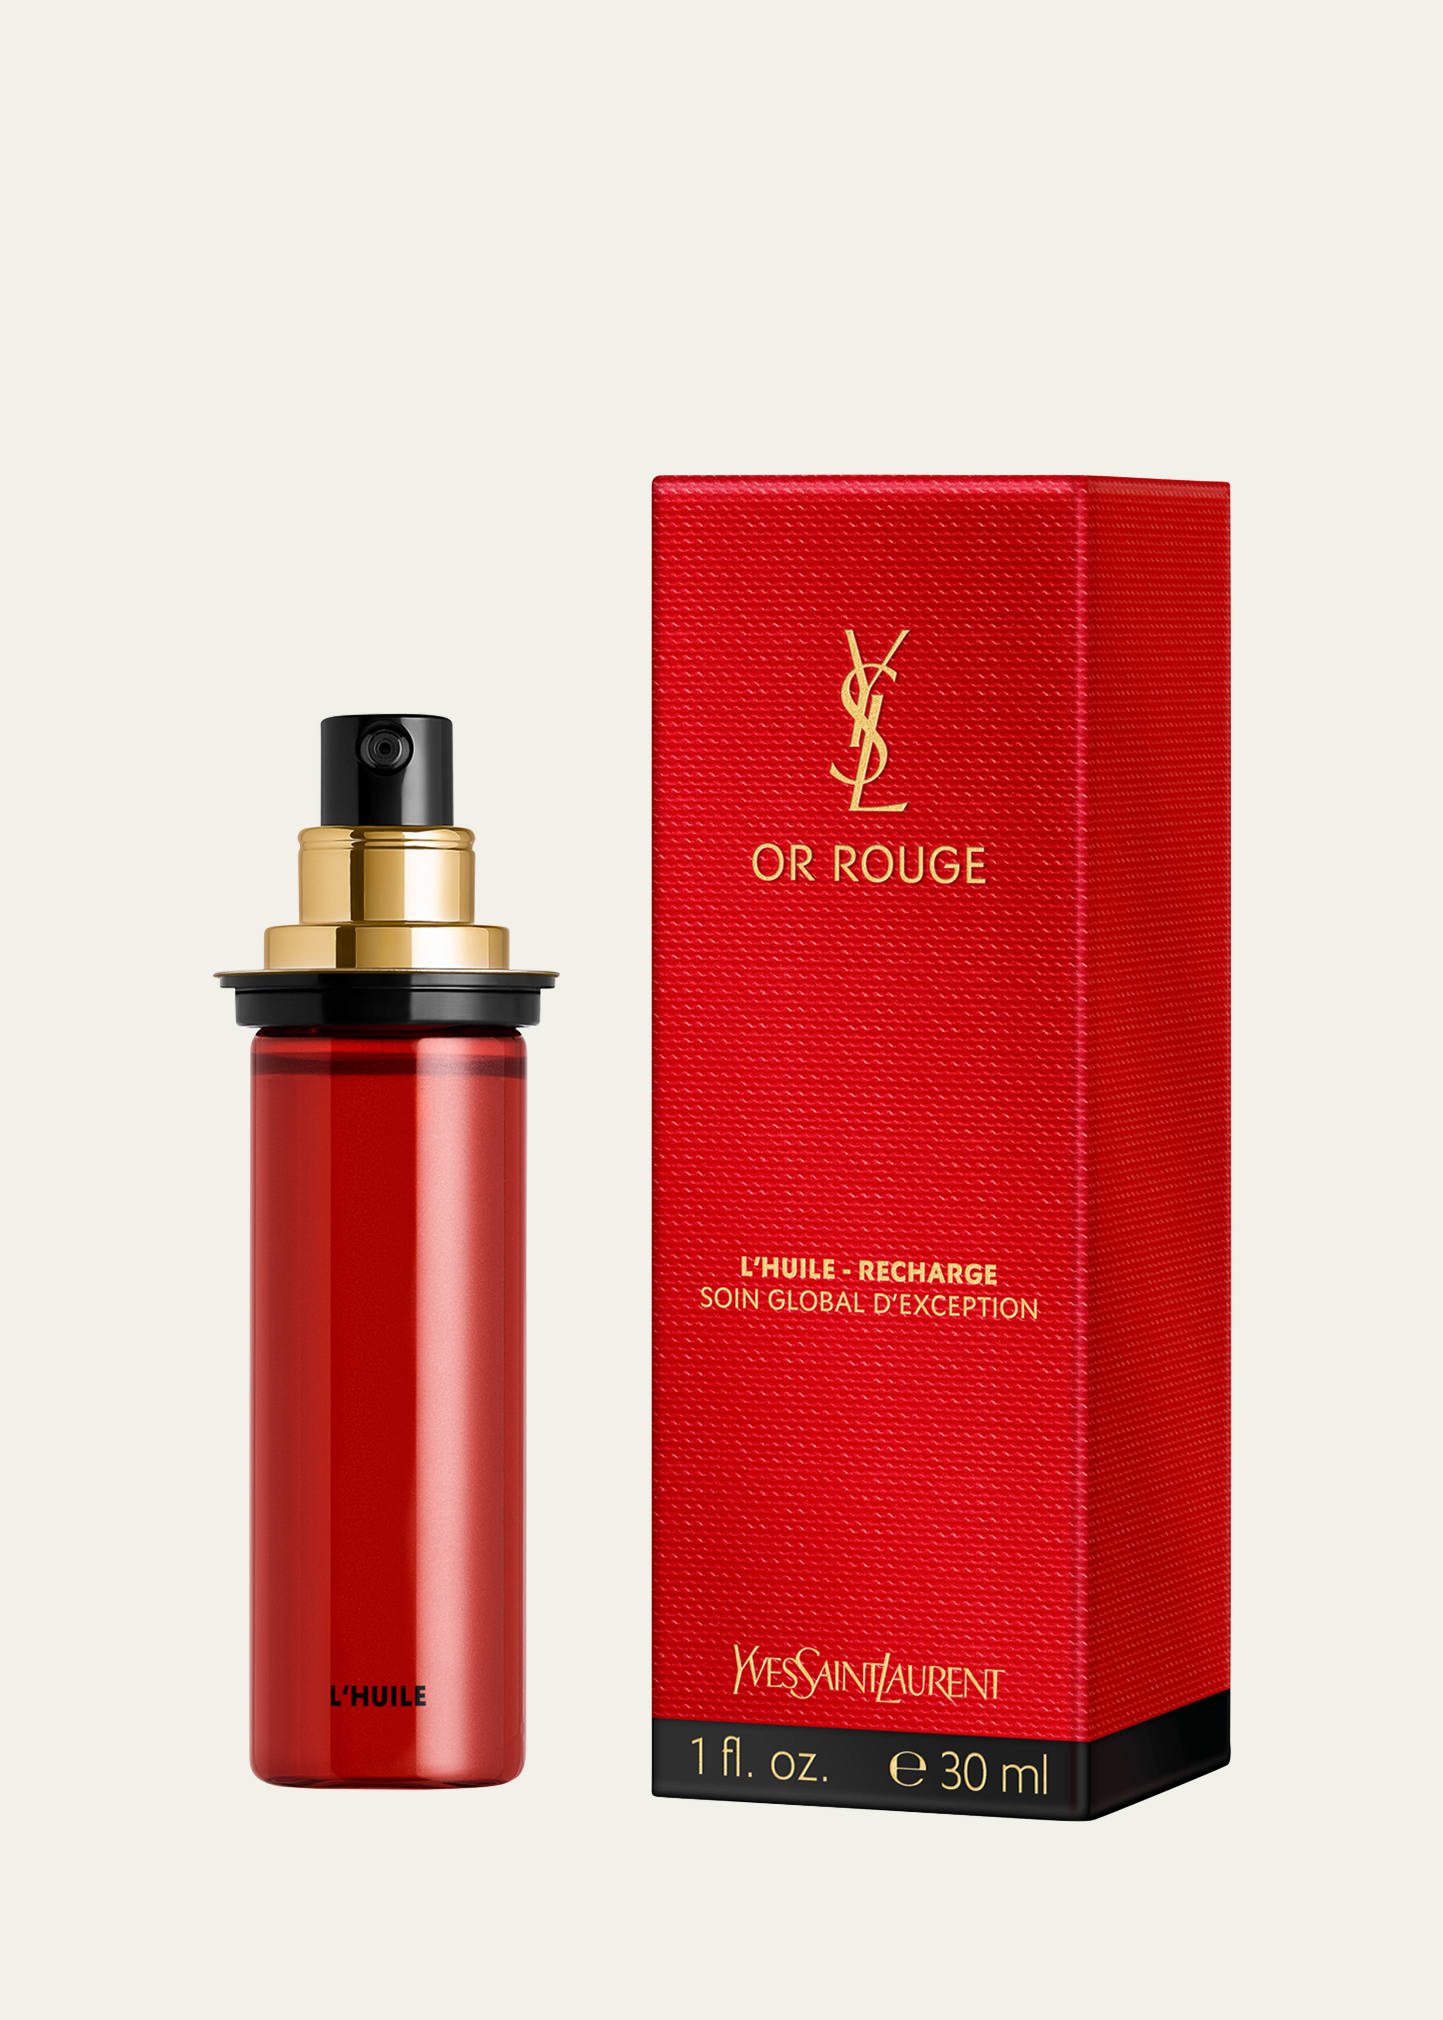 Saint Laurent Or Rouge L'huille Serum Refill, 1 Oz. In Red